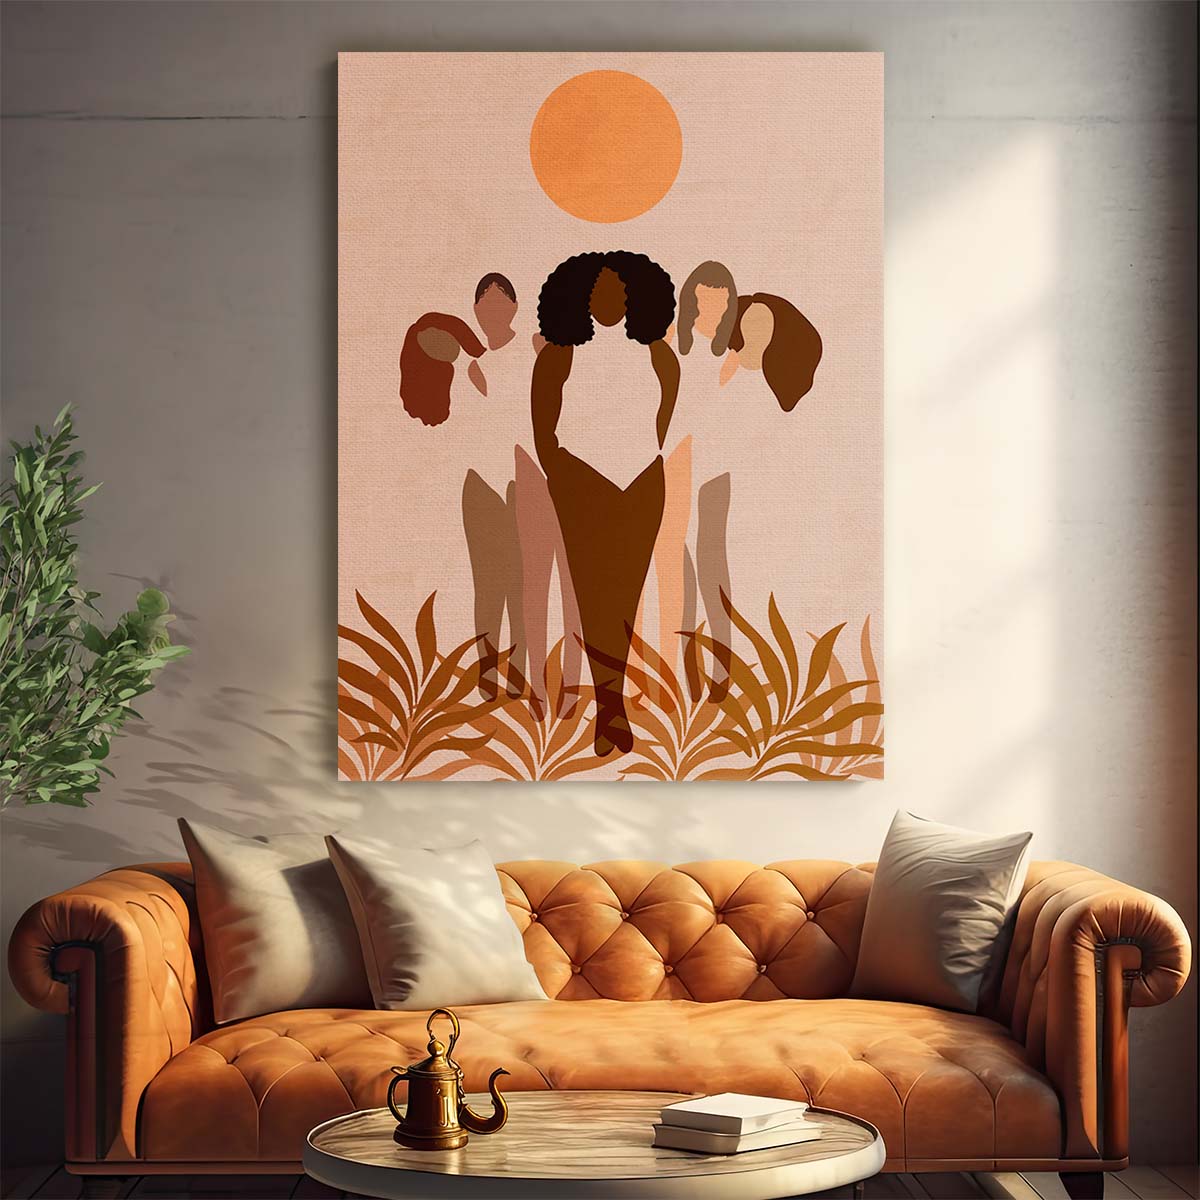 Empowered Colorful Boho Women Illustration with Botanicals by Luxuriance Designs, made in USA